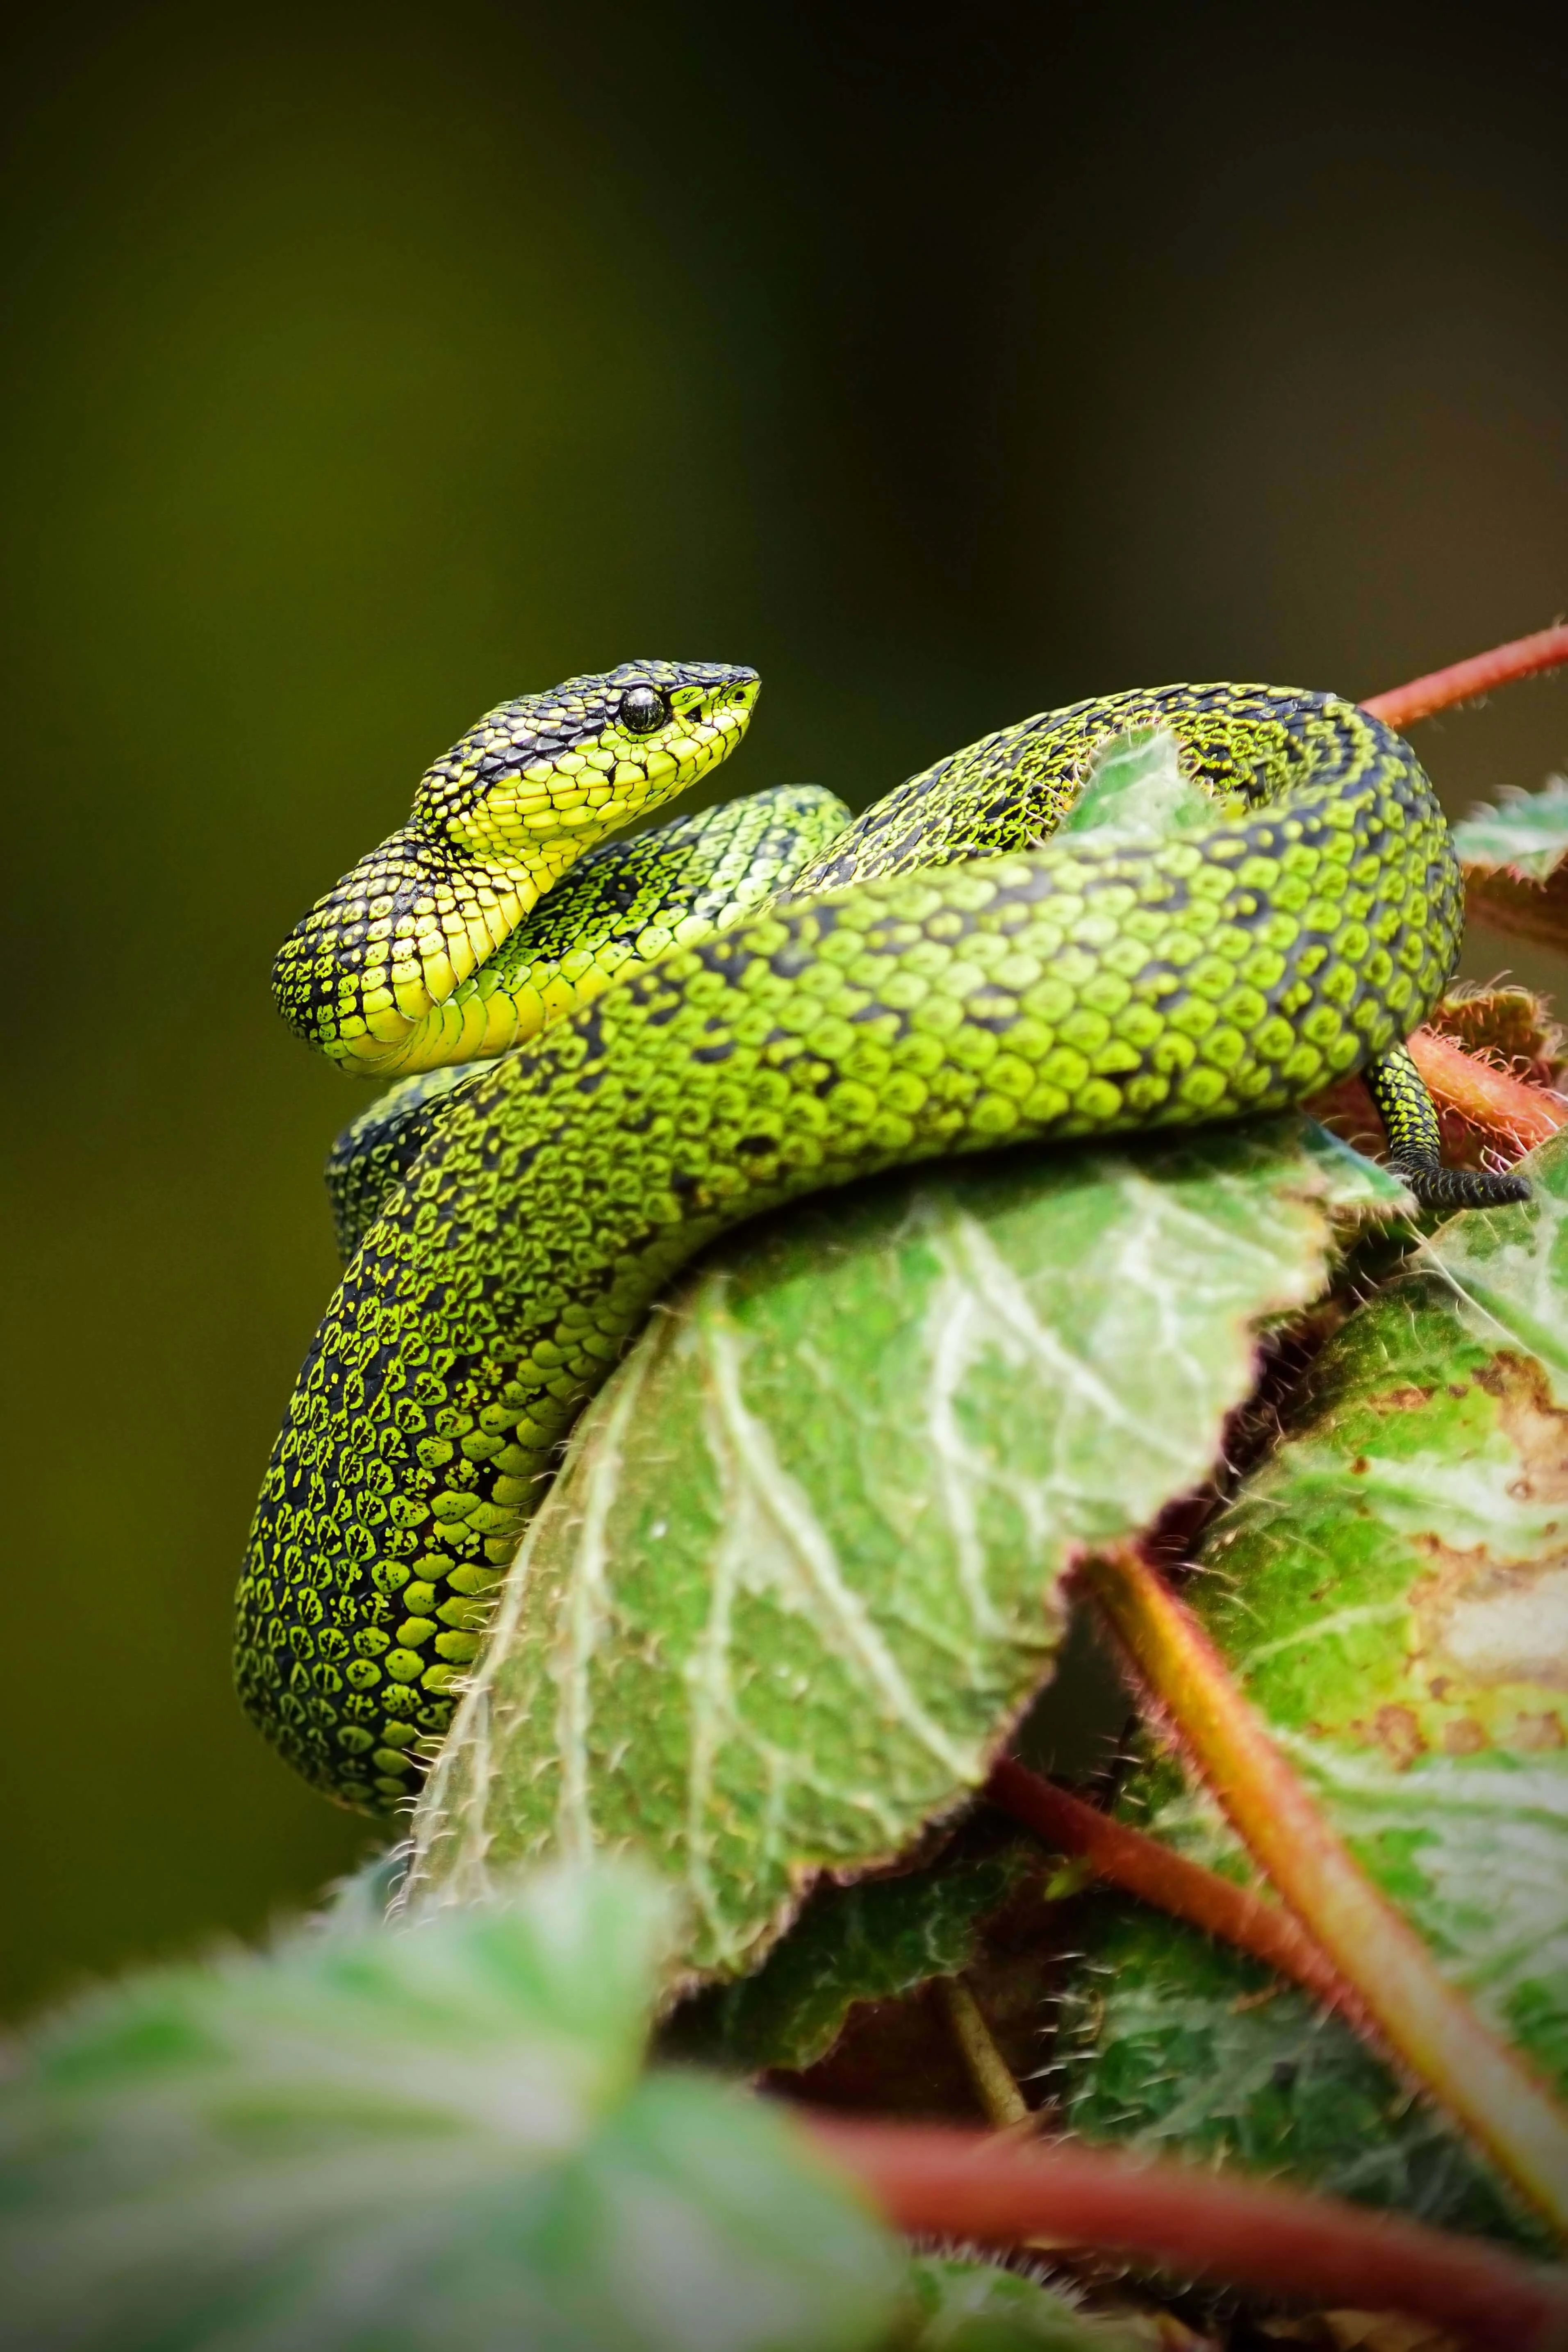  20 of the worlds 25 deadliest snakes can be found in Australia